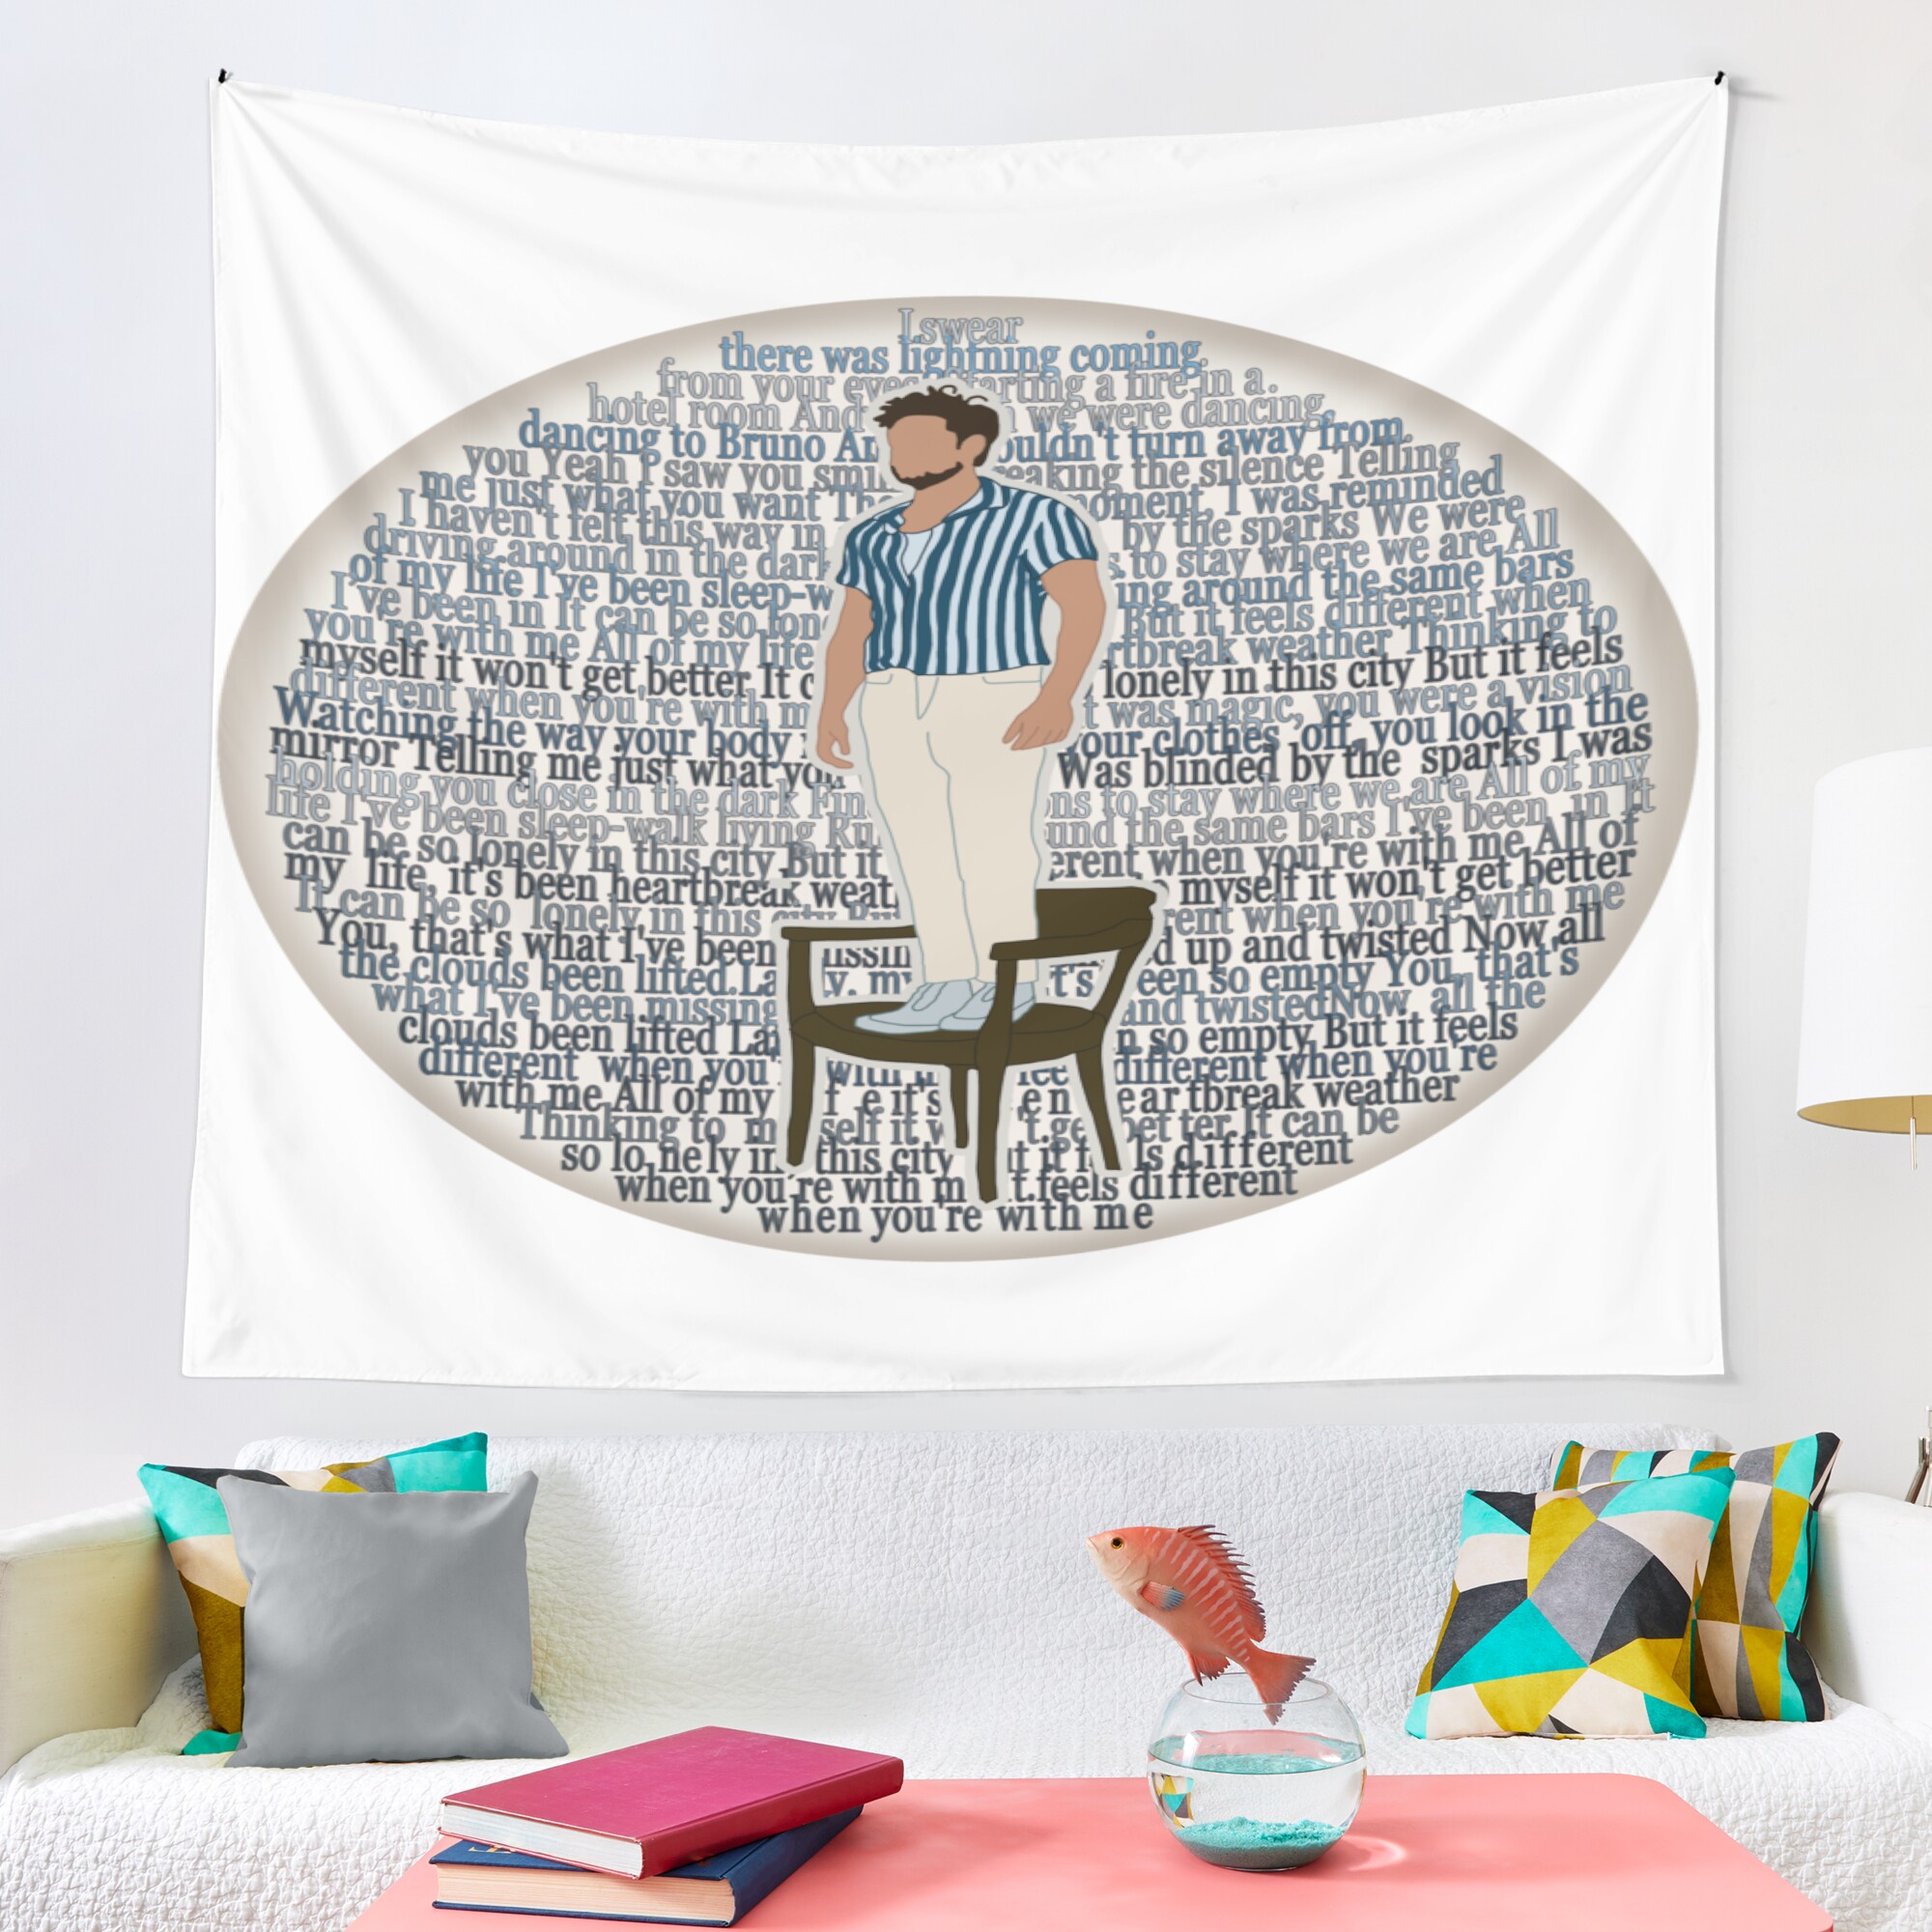 urtapestry lifestyle largesquare2000x2000 1 - Niall Horan Shop